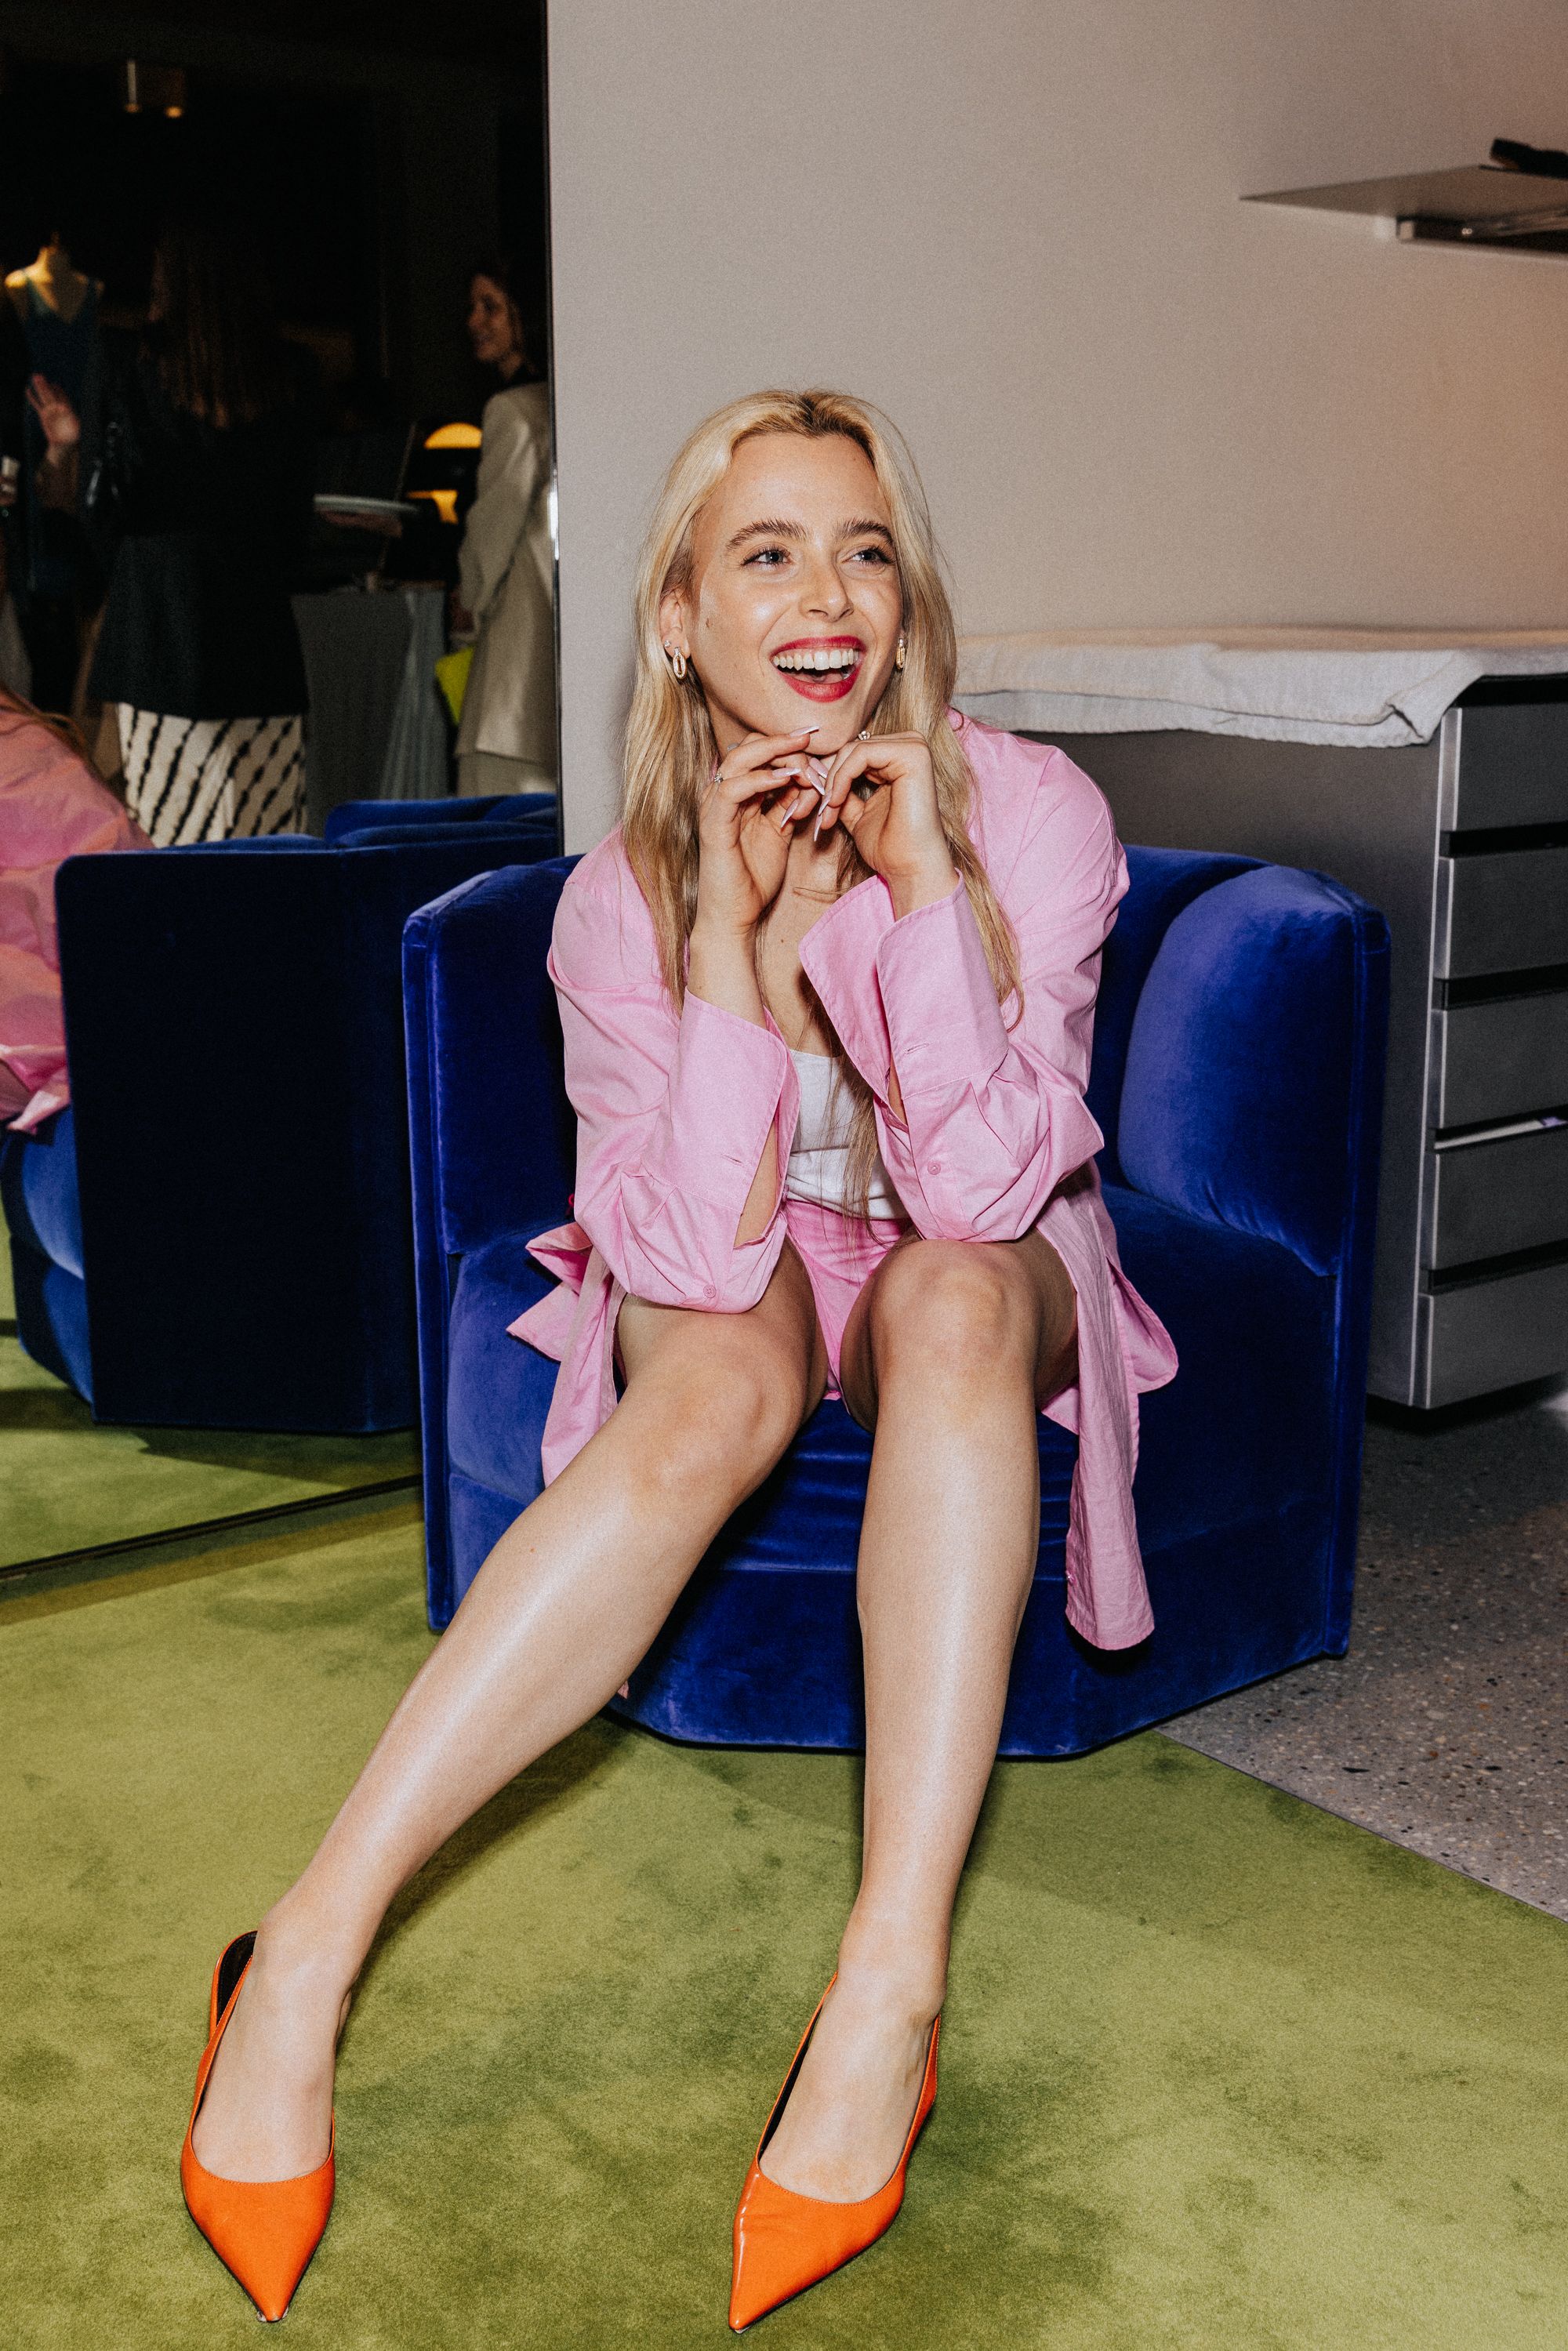 Woman smiling sitting on blue velvet chair wearing pink cotton shirt and shorts